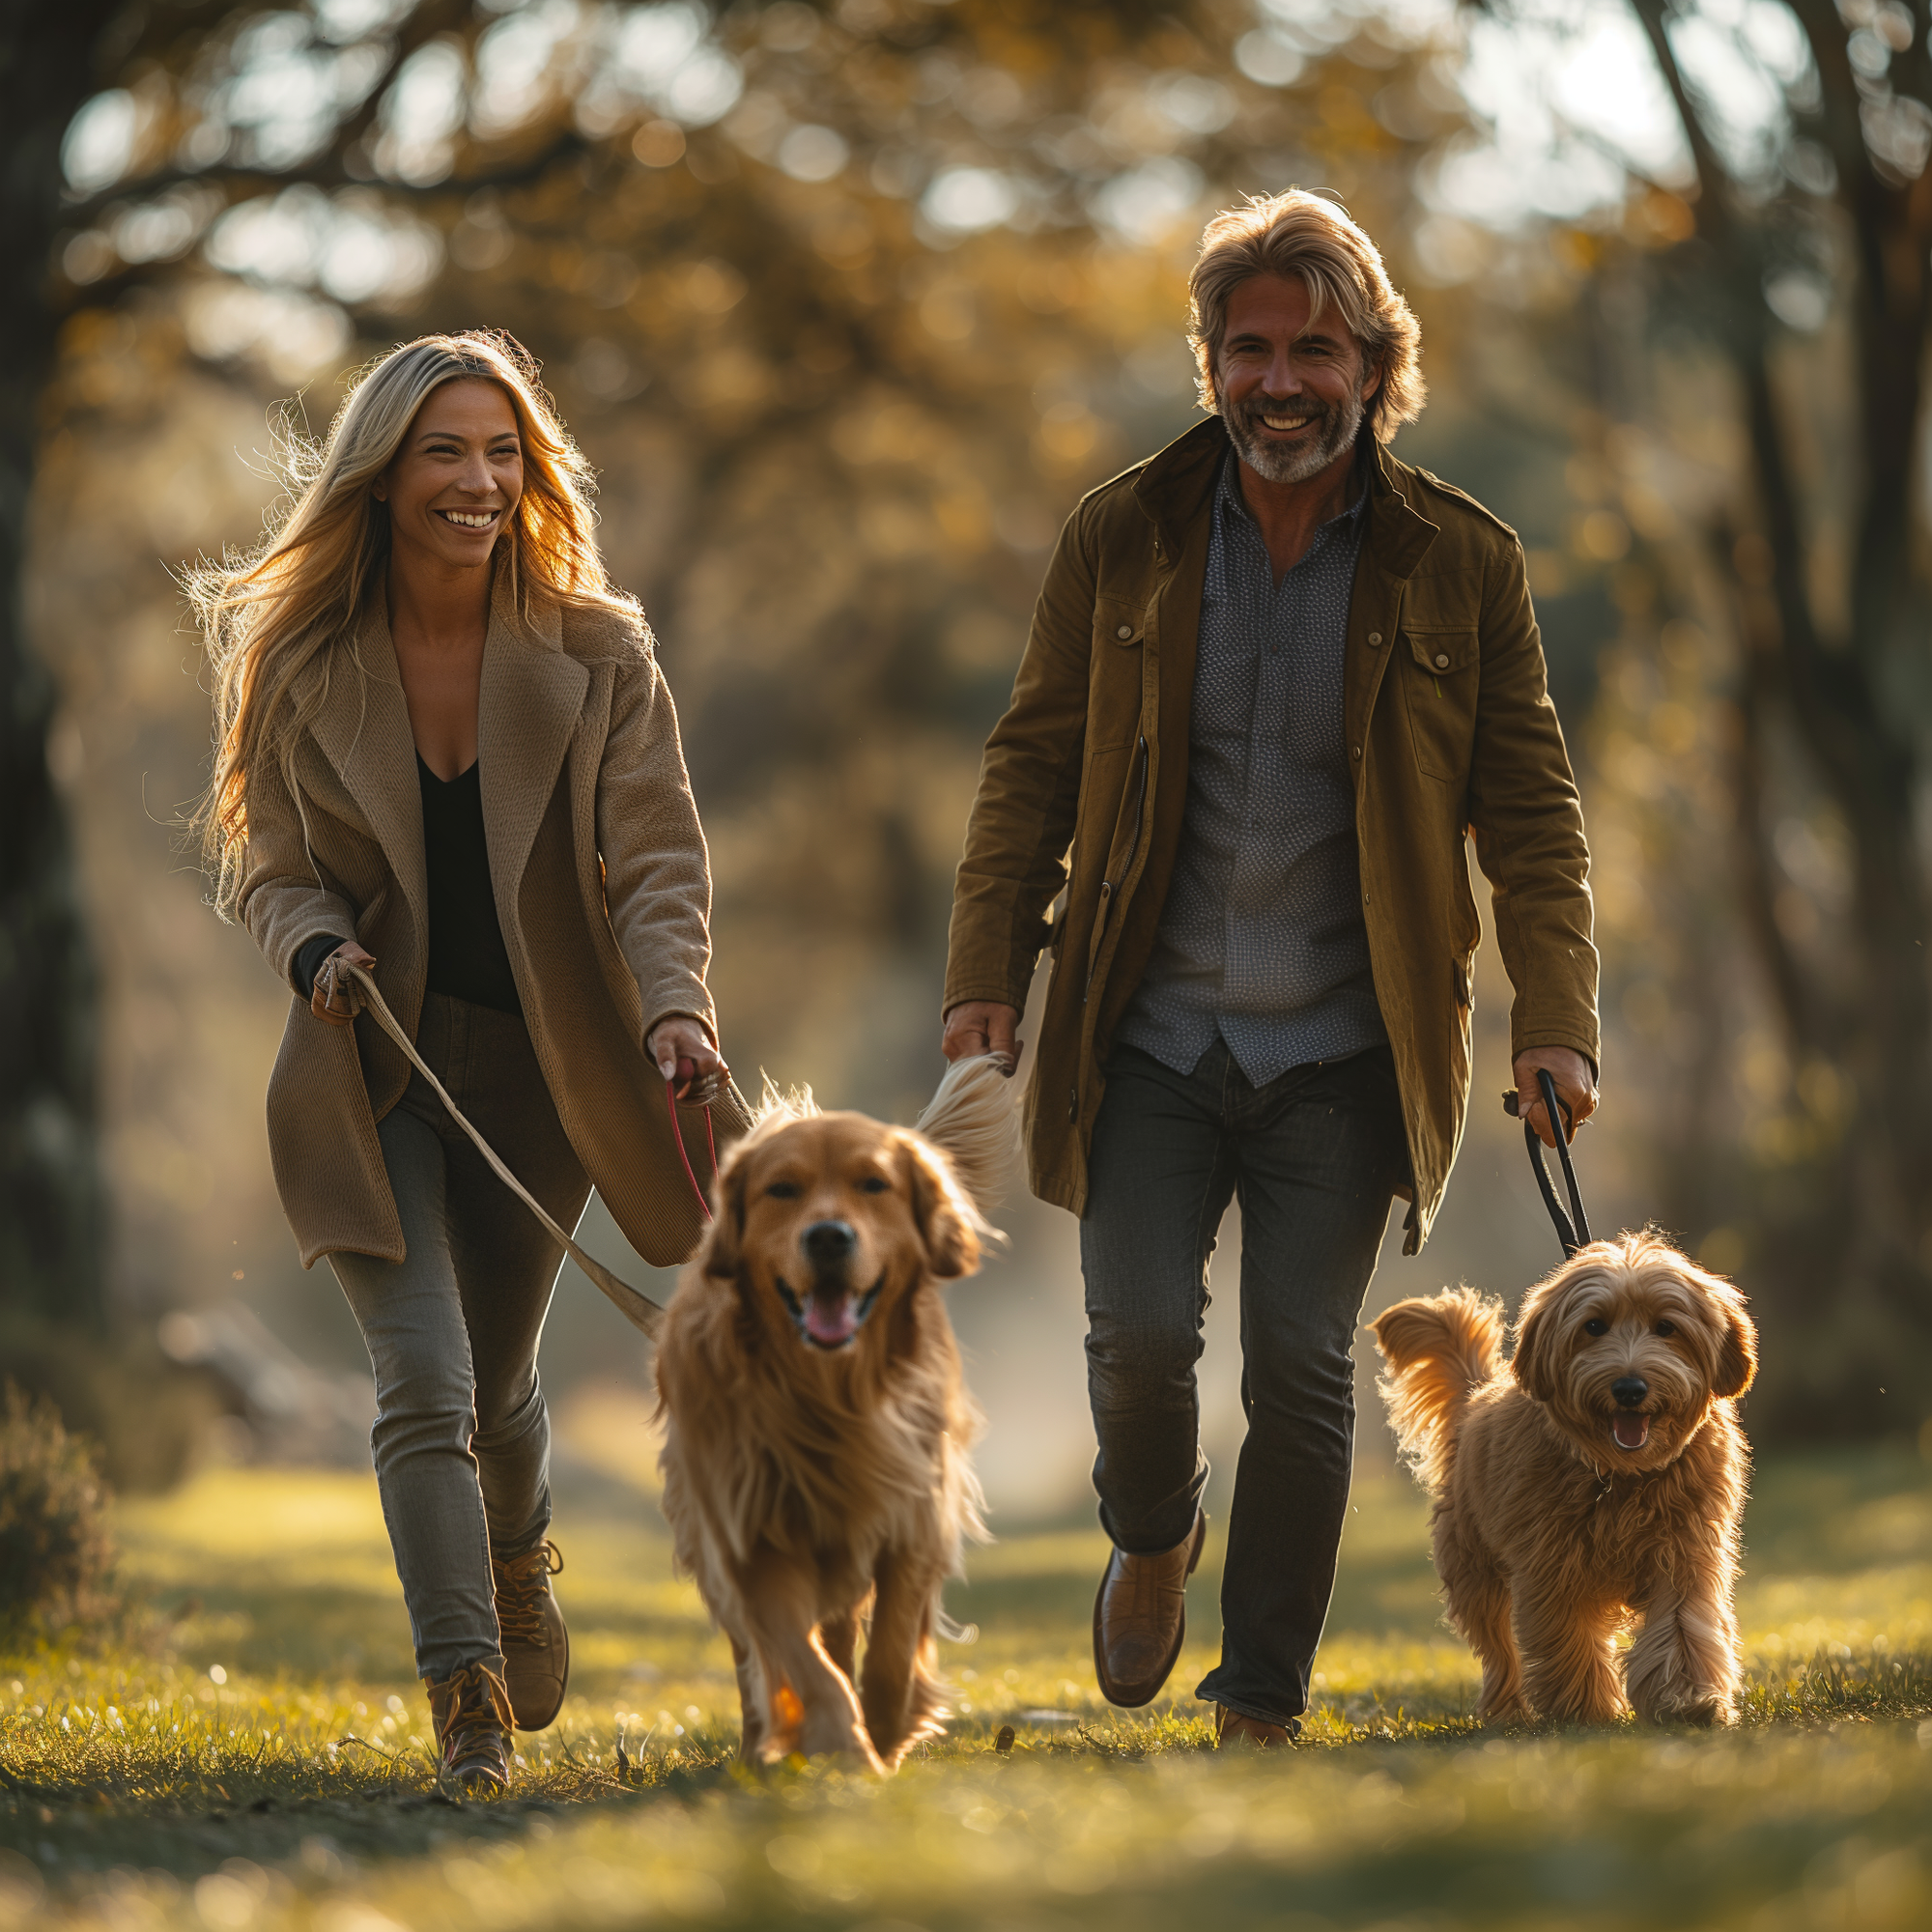 An image of a man and woman walking their dogs in a park to help manage setpoint weight.